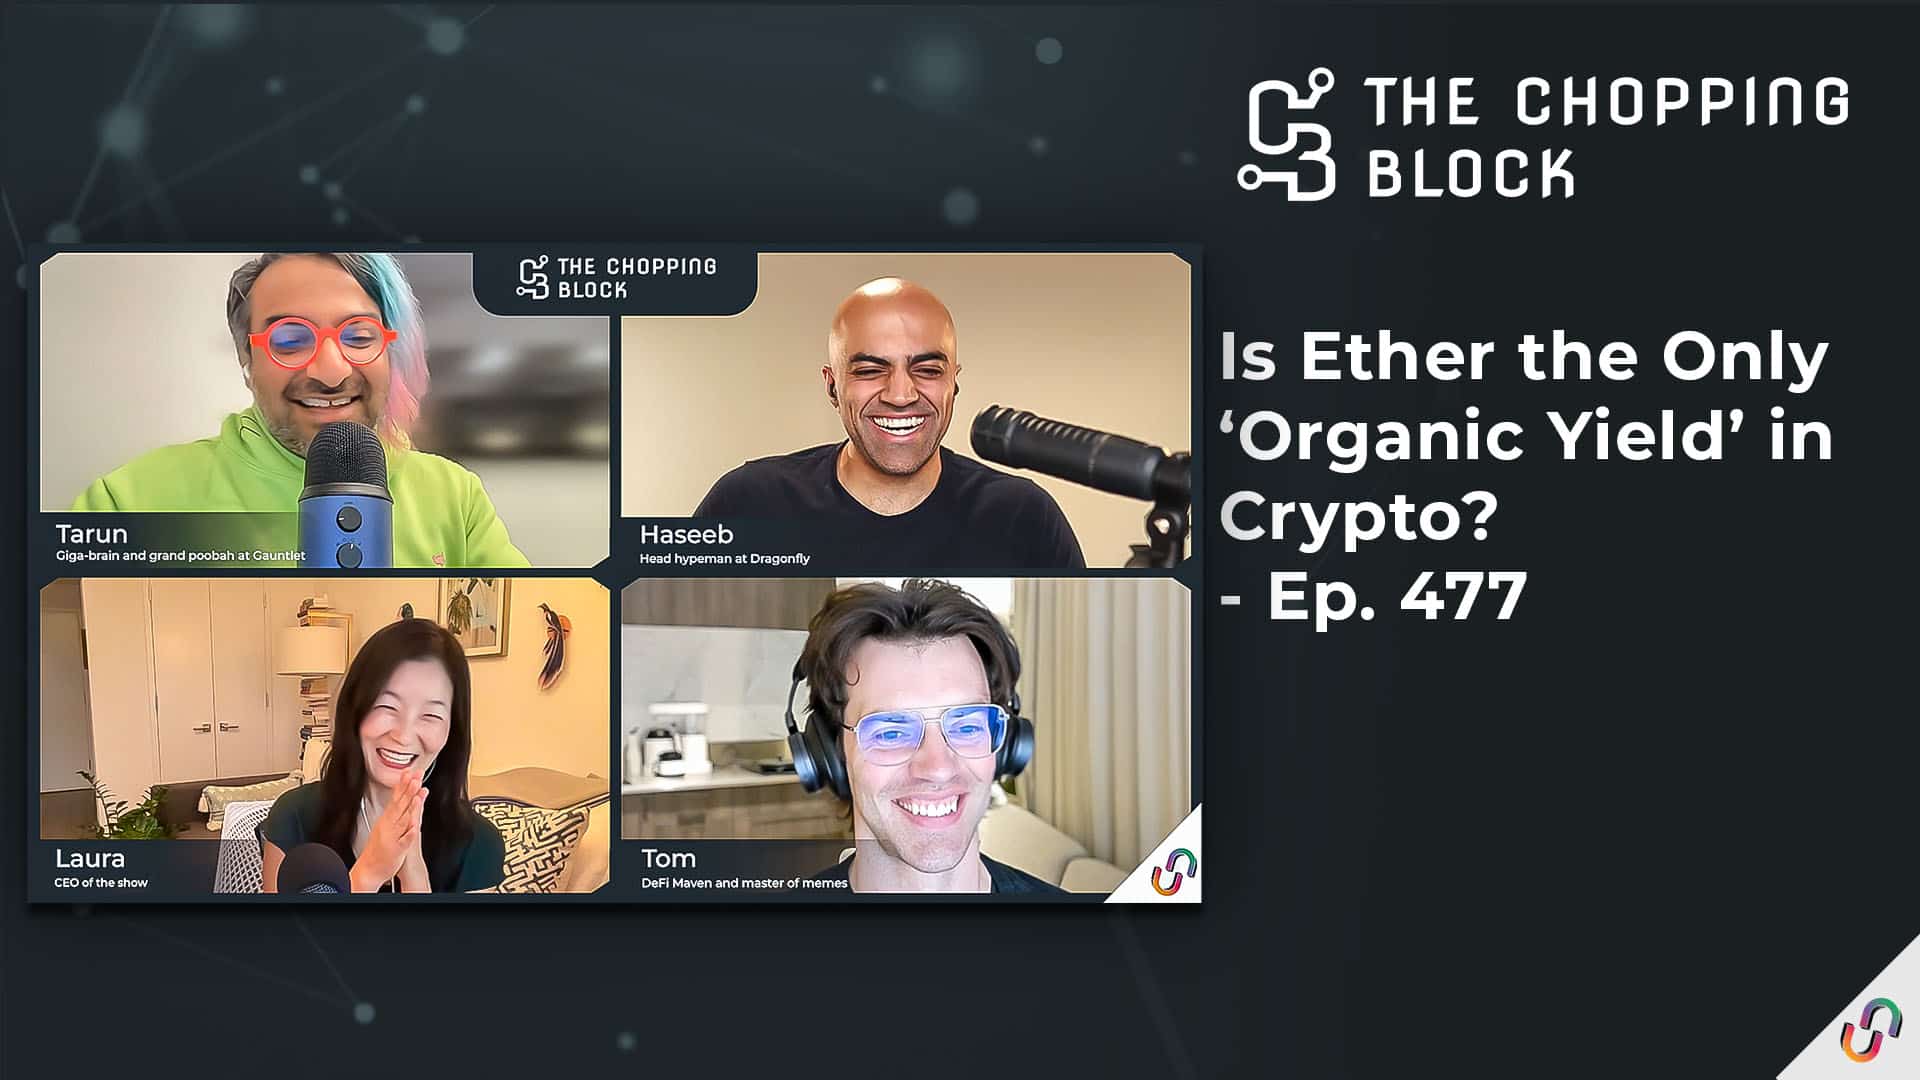 The Chopping Block: Is Ether the Only ‘Organic Yield’ in Crypto? - Ep. 477